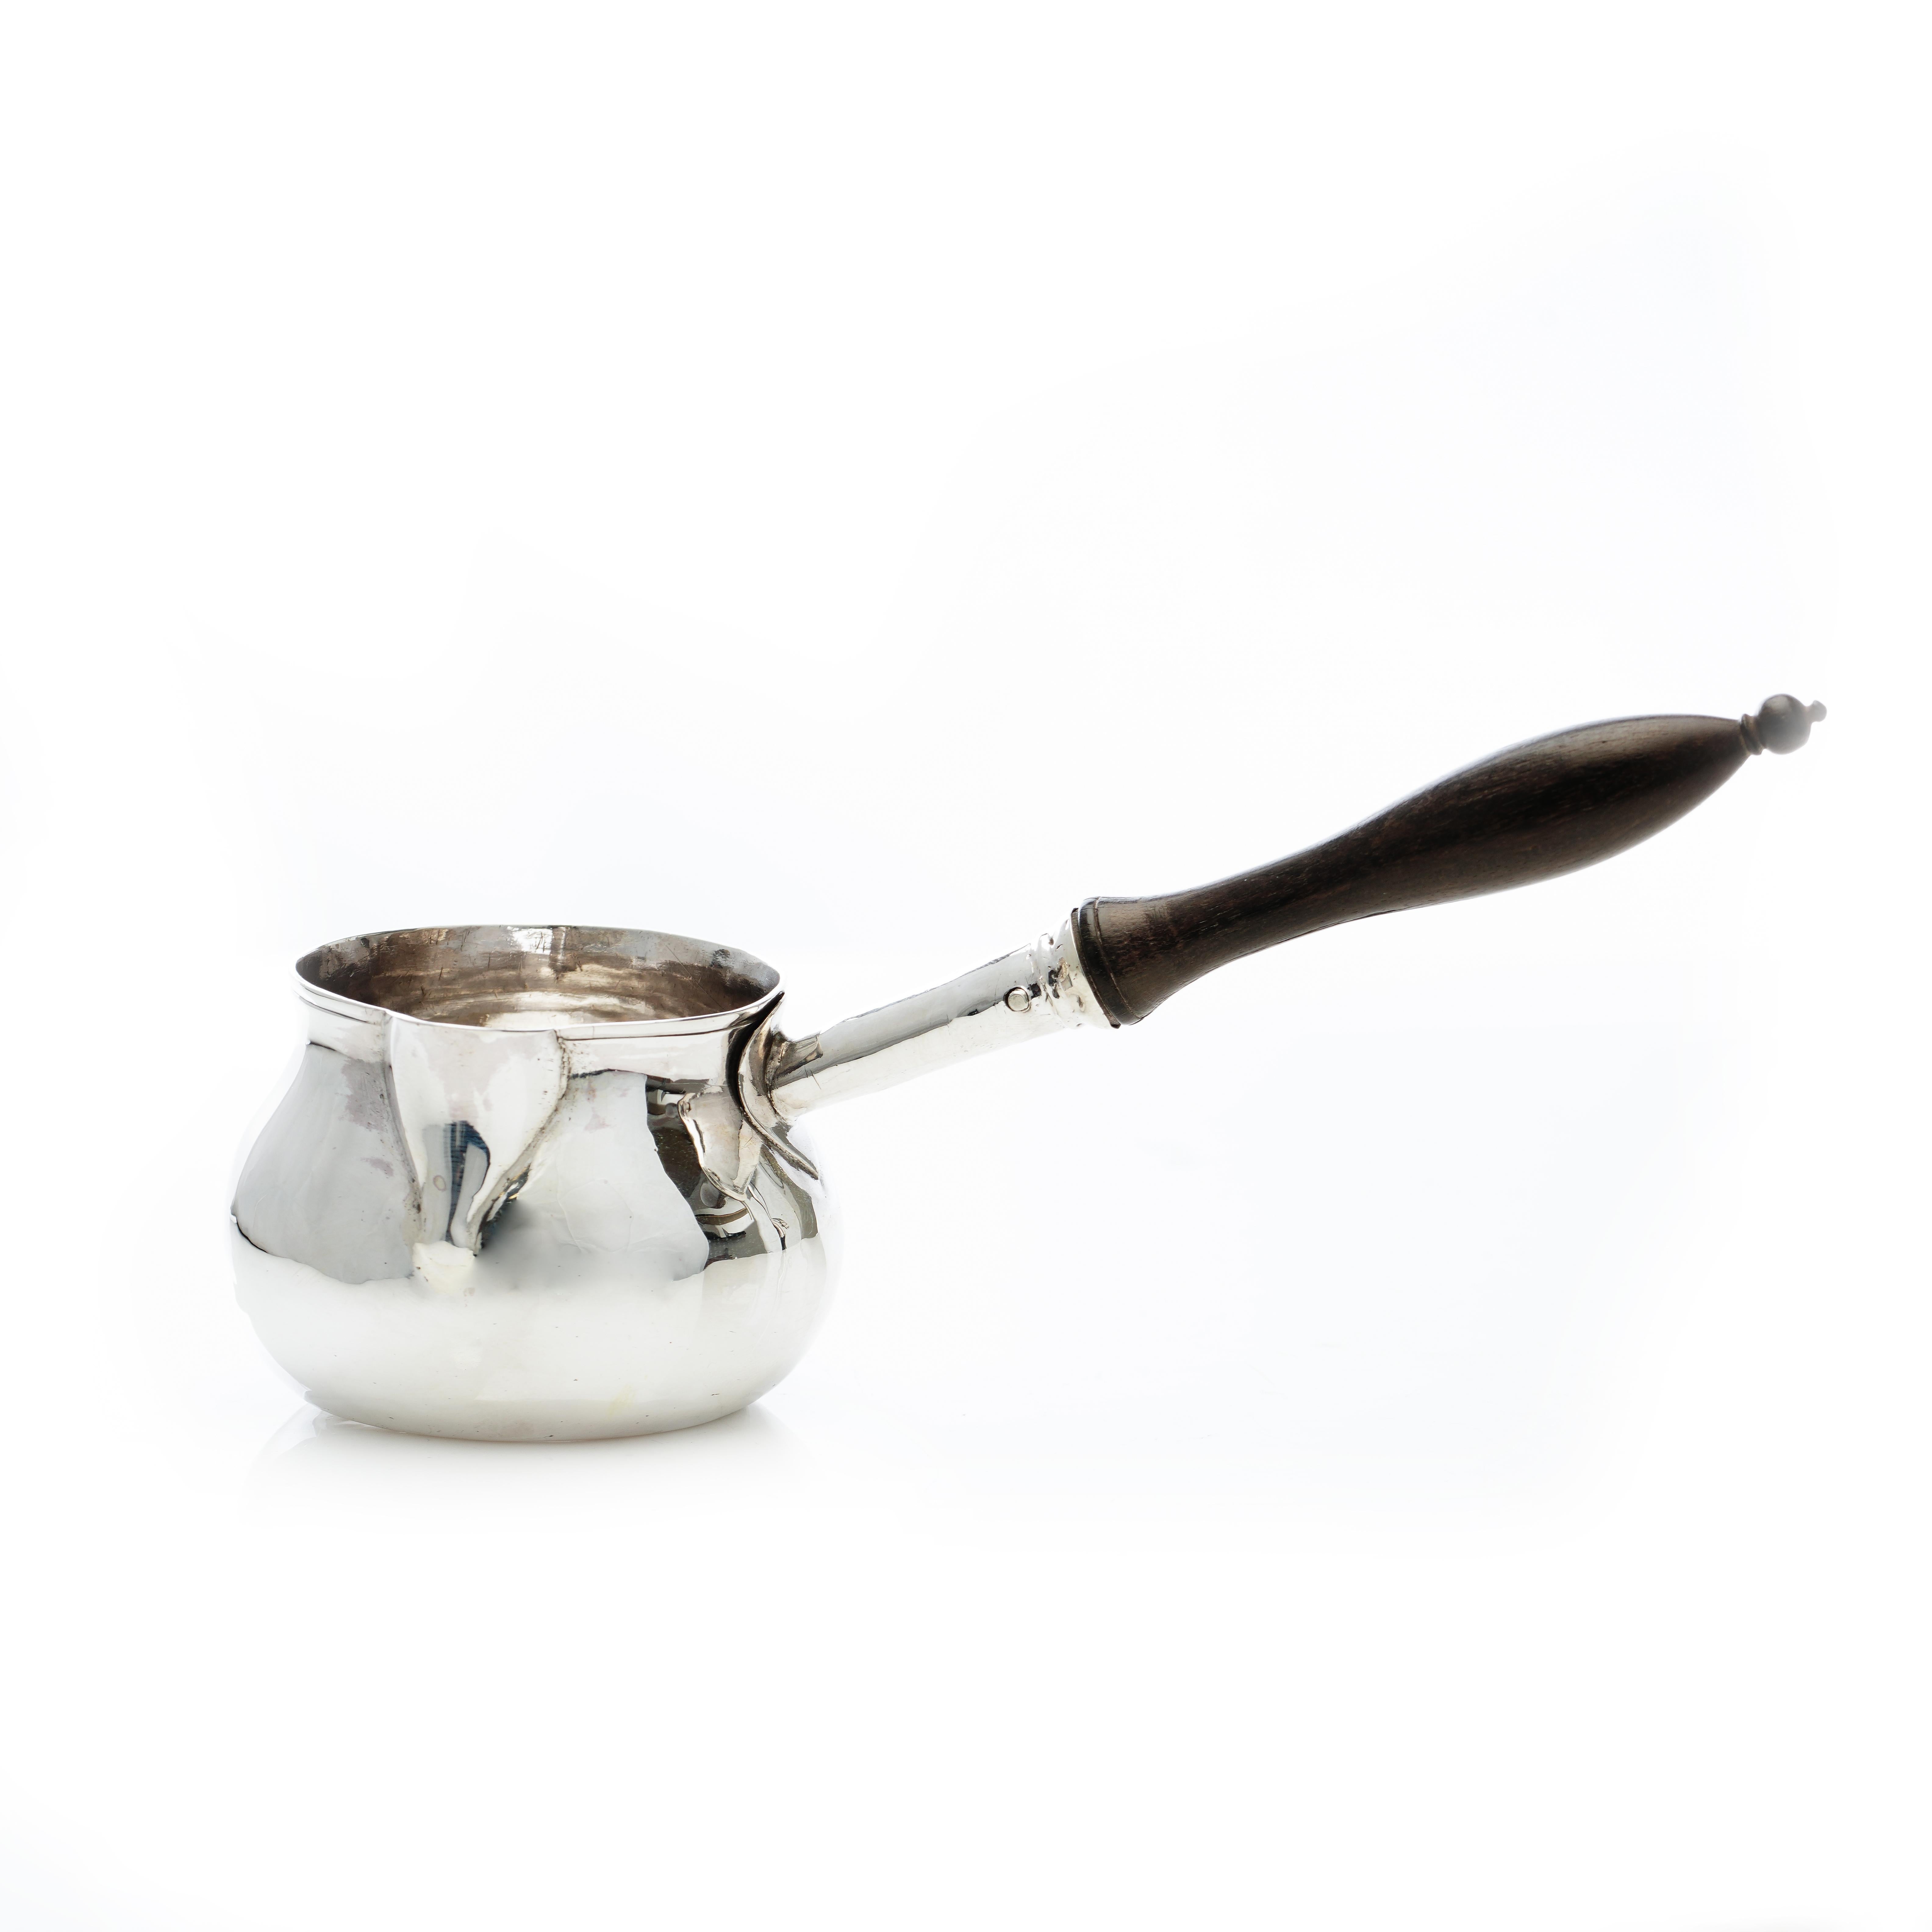 Antique Georgian sterling silver small brandy warming pan.
The pan has a wooden handle.
Maker: G.J
Made in England, London, 1809
Fully hallmarked.

Dimensions -
Length: 16.5 x 6 x 4.3 cm
Weight: 63 grams in total.

Condition: Minor age